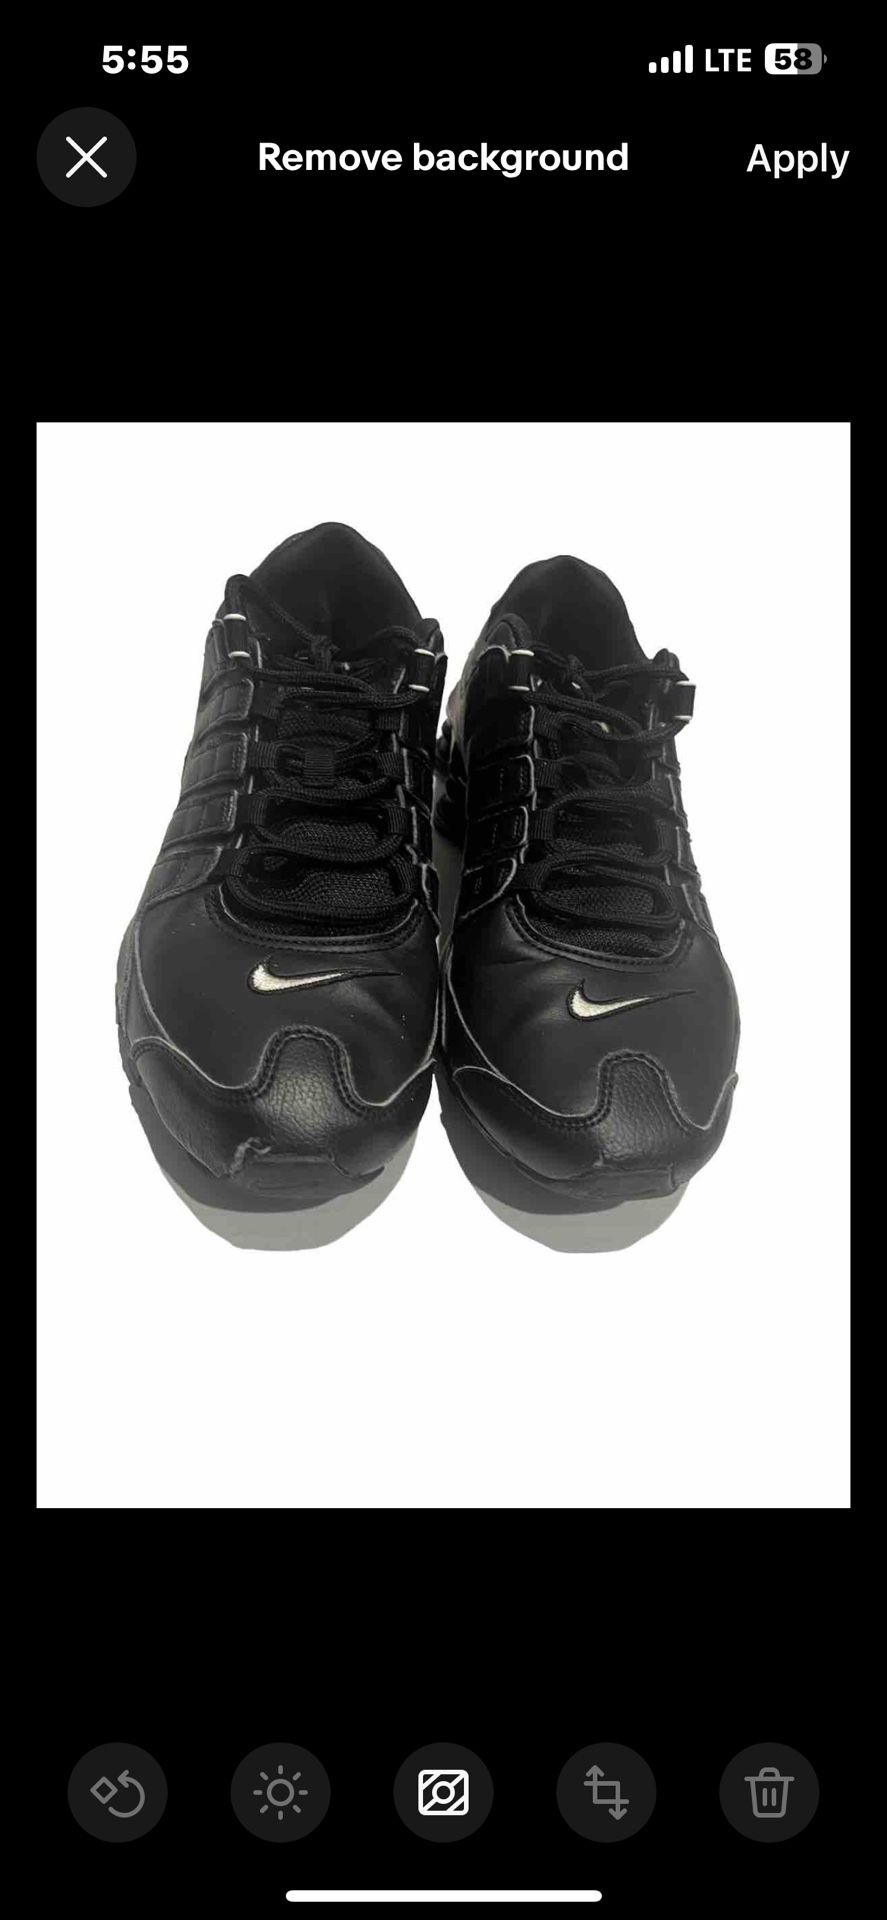 Nike Shox NZ Running Shoes Mens Size 9 Black Sneakers Leather 501524-091